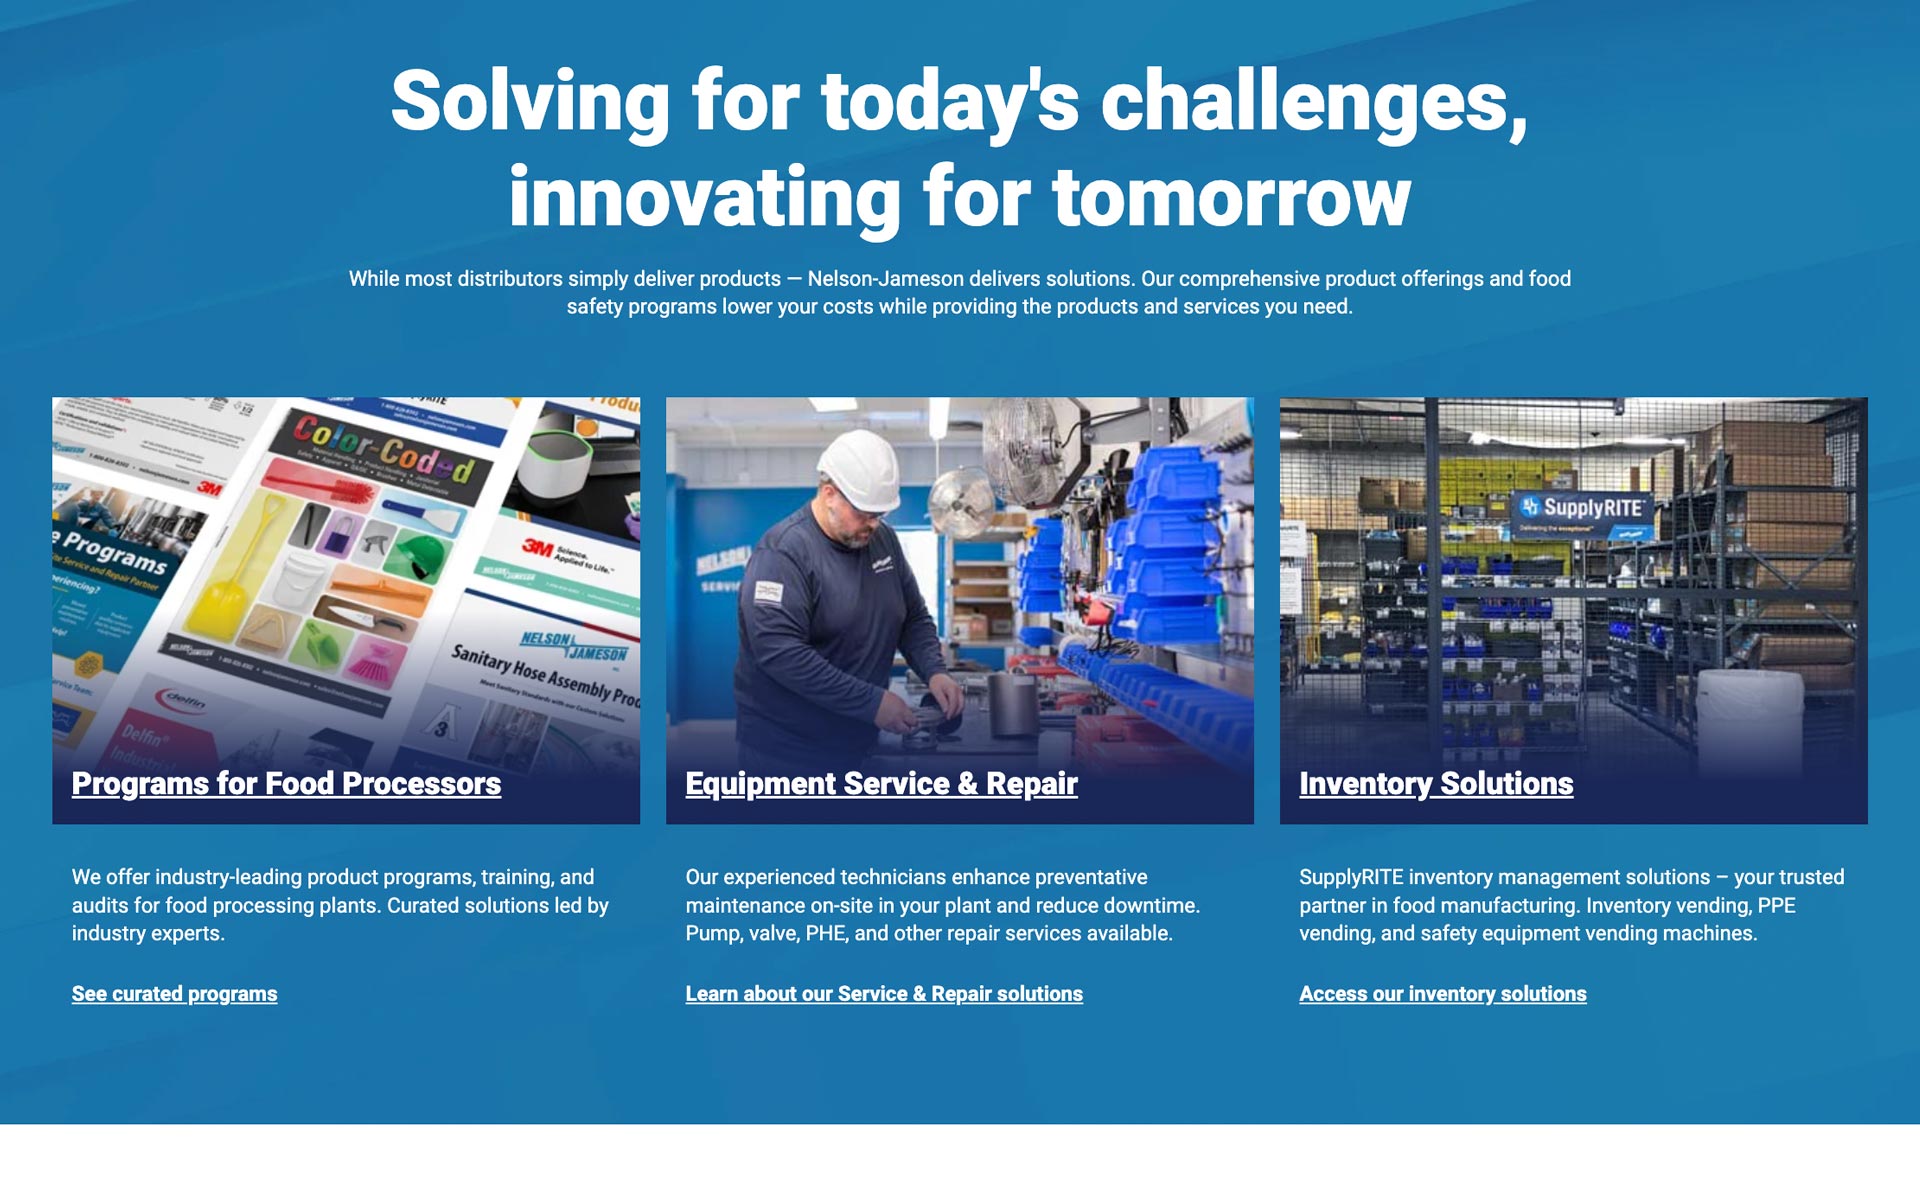 screenshot of Nelson-Jameson's website with headline "Solving for today's challenges, innovating for tomorrow' with three sections with links to learn more ; 1) Programs for Food Processors, 2) Equipment Service & Repair, 3) Inventory Solutions